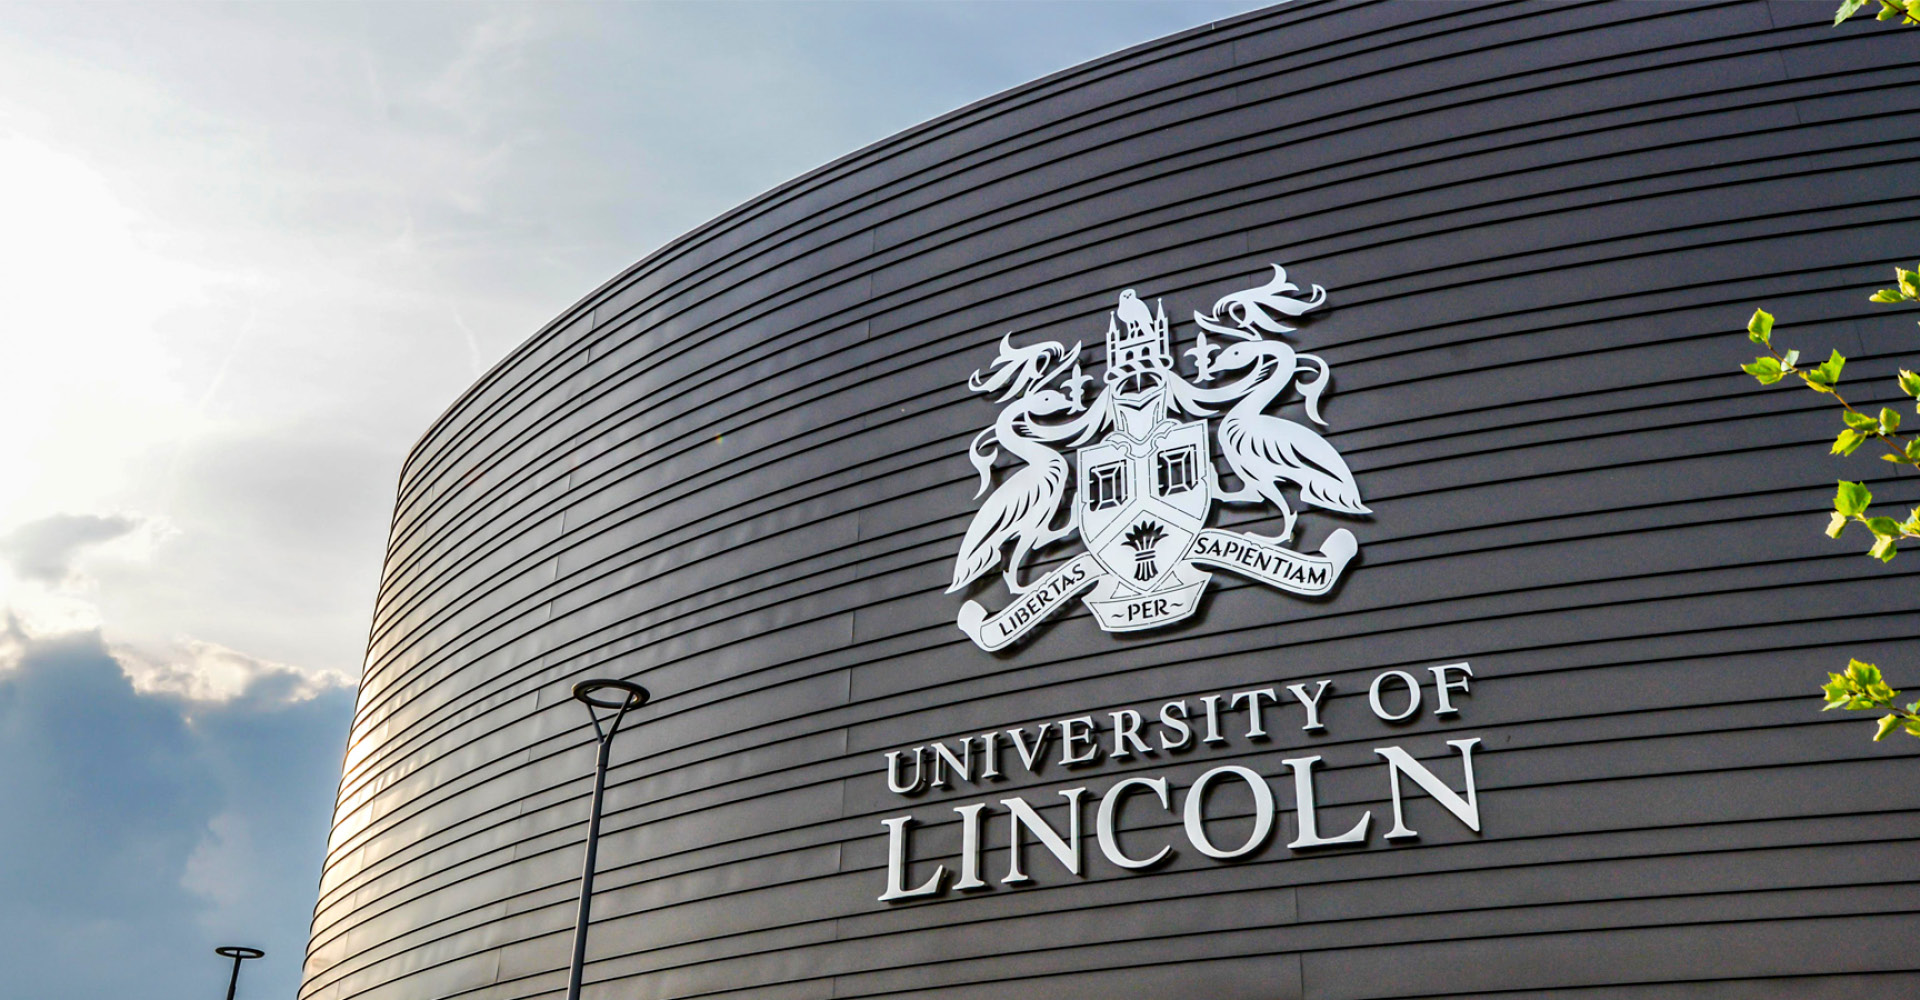 Partnership with University Of Lincoln